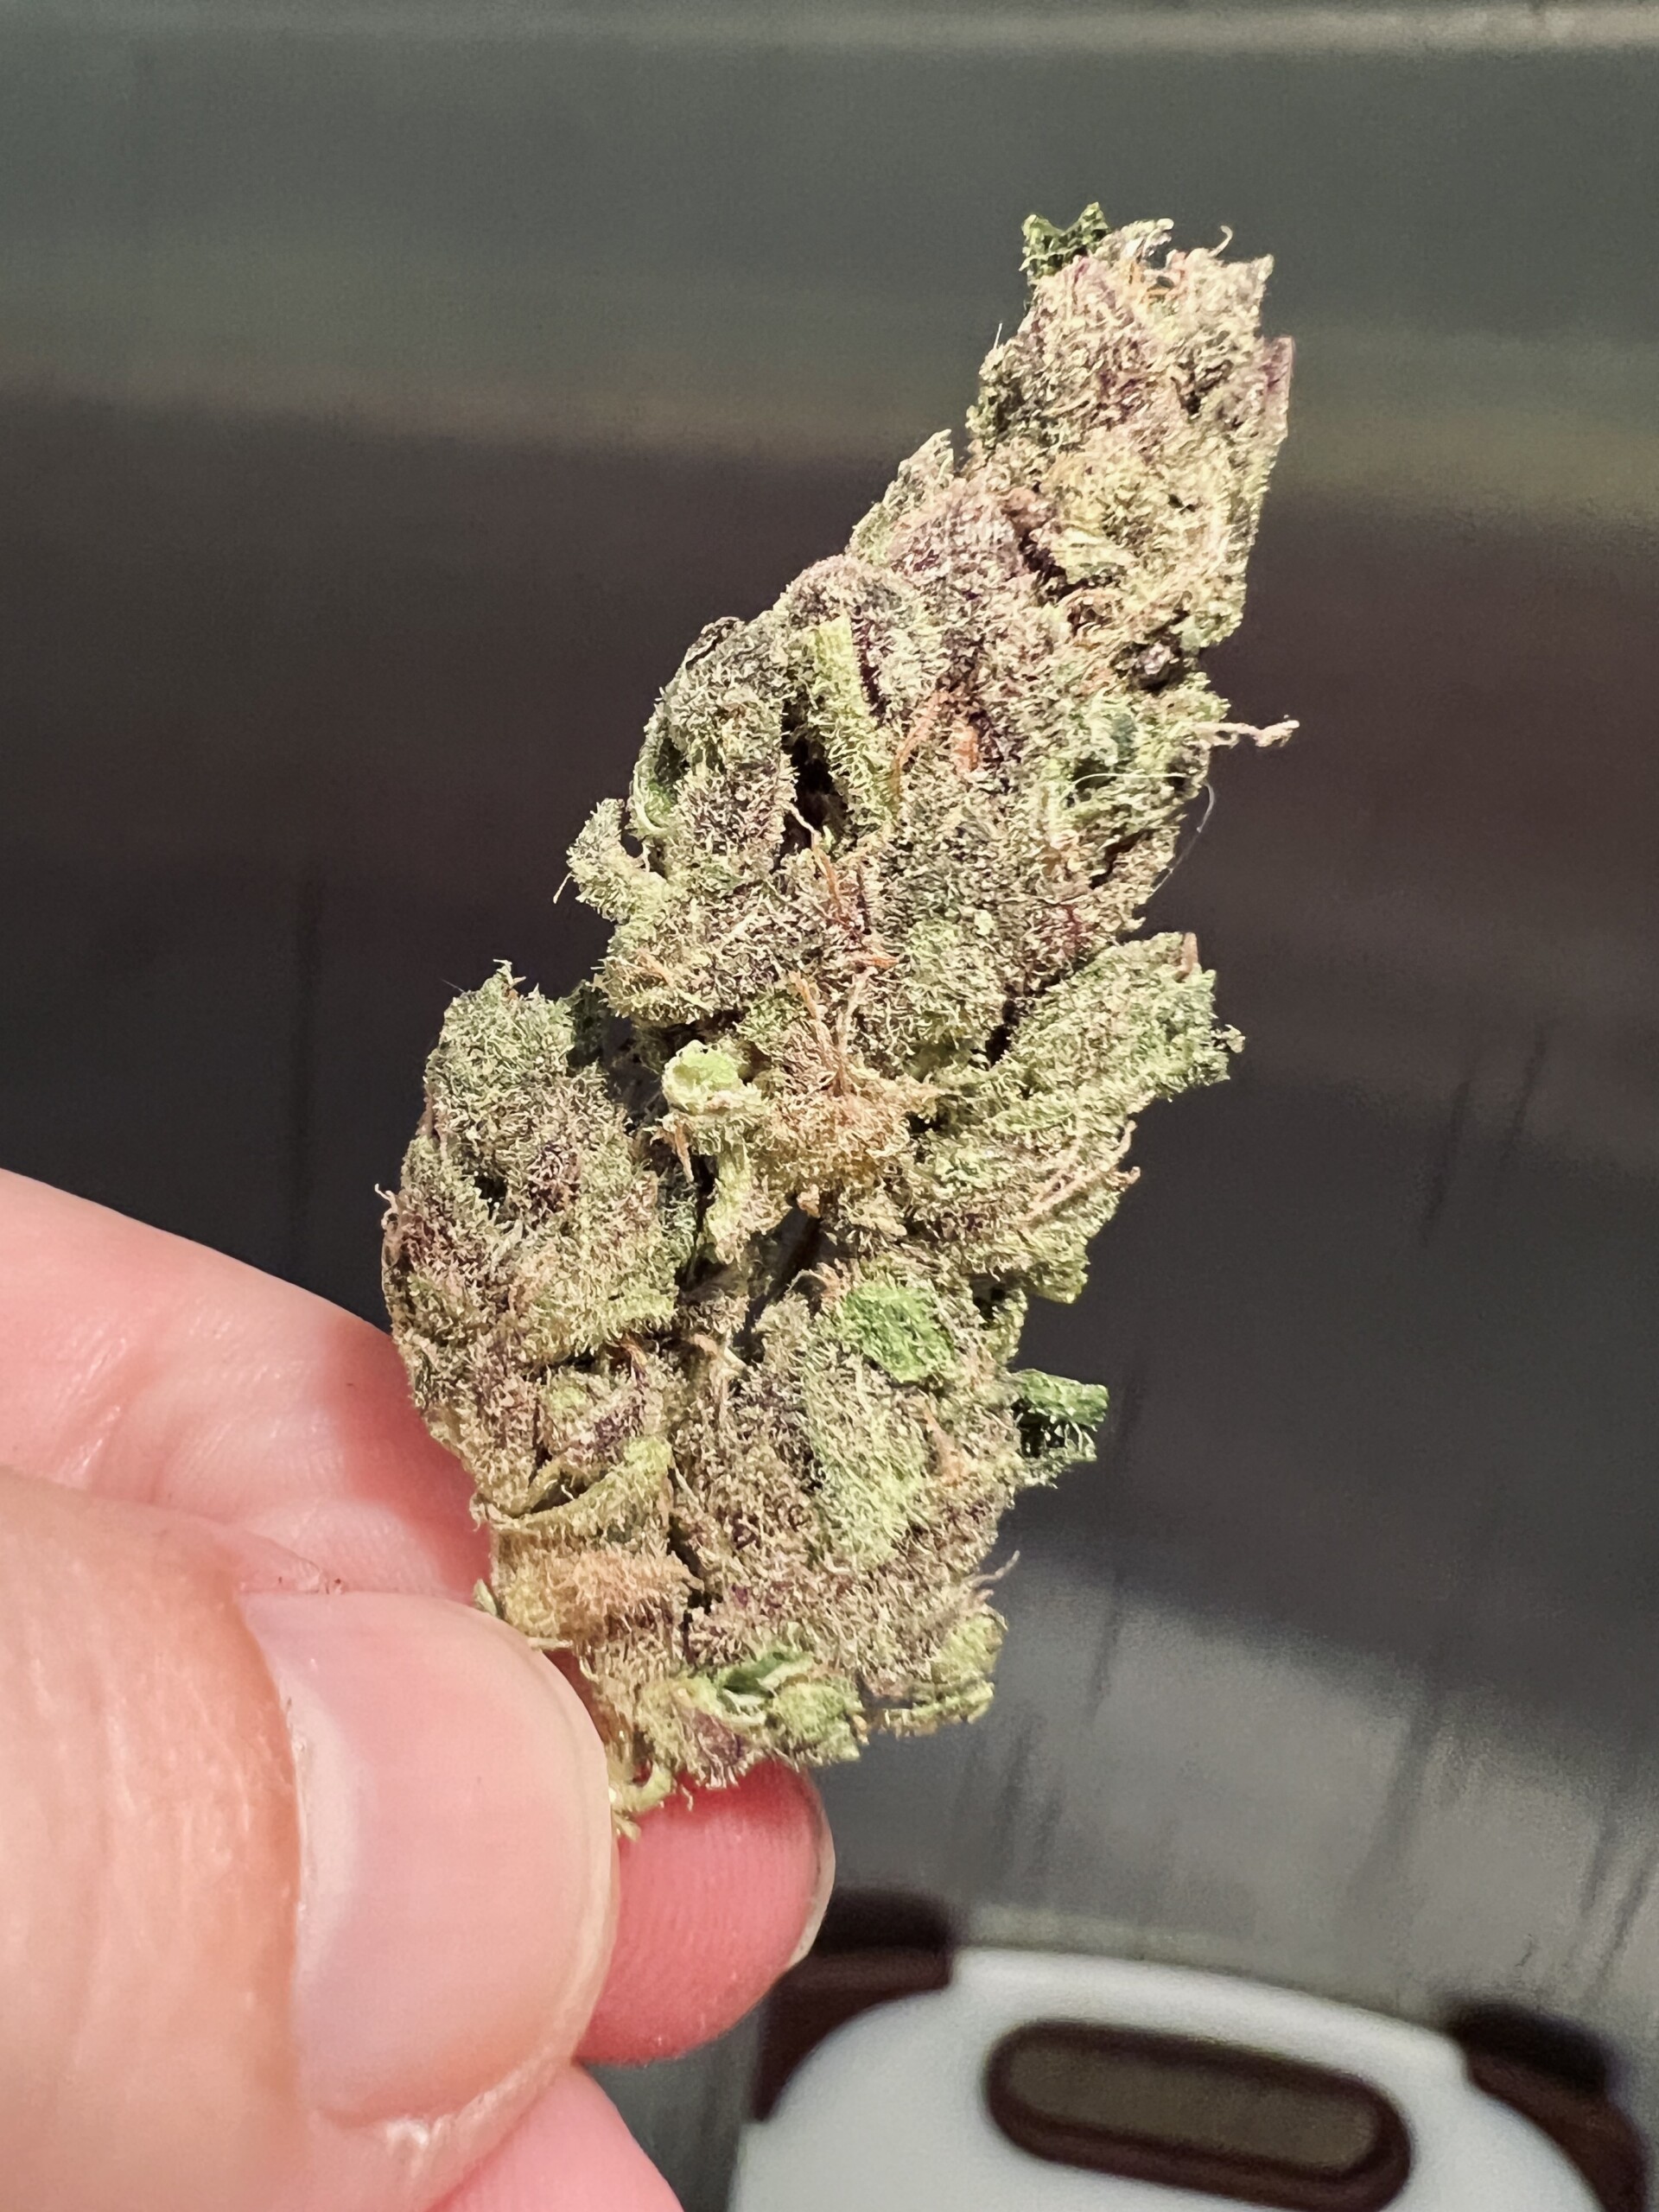 Full Gas - Strain Review - HighThailand